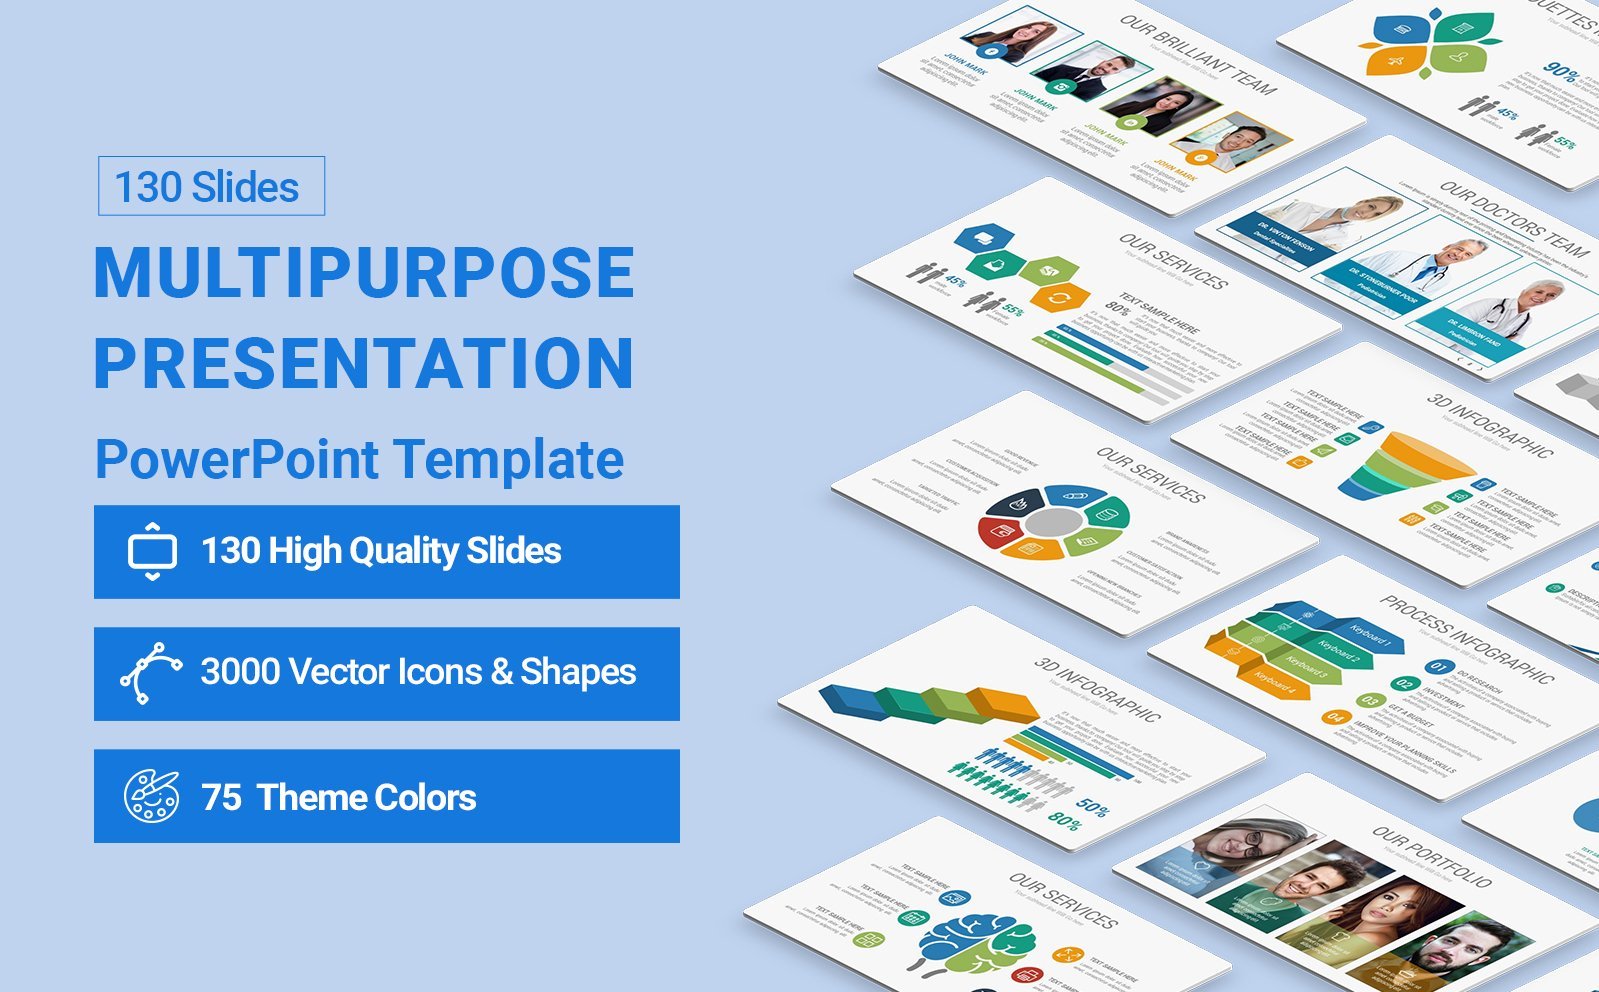 Template #155590 Analysis Best Webdesign Template - Logo template Preview